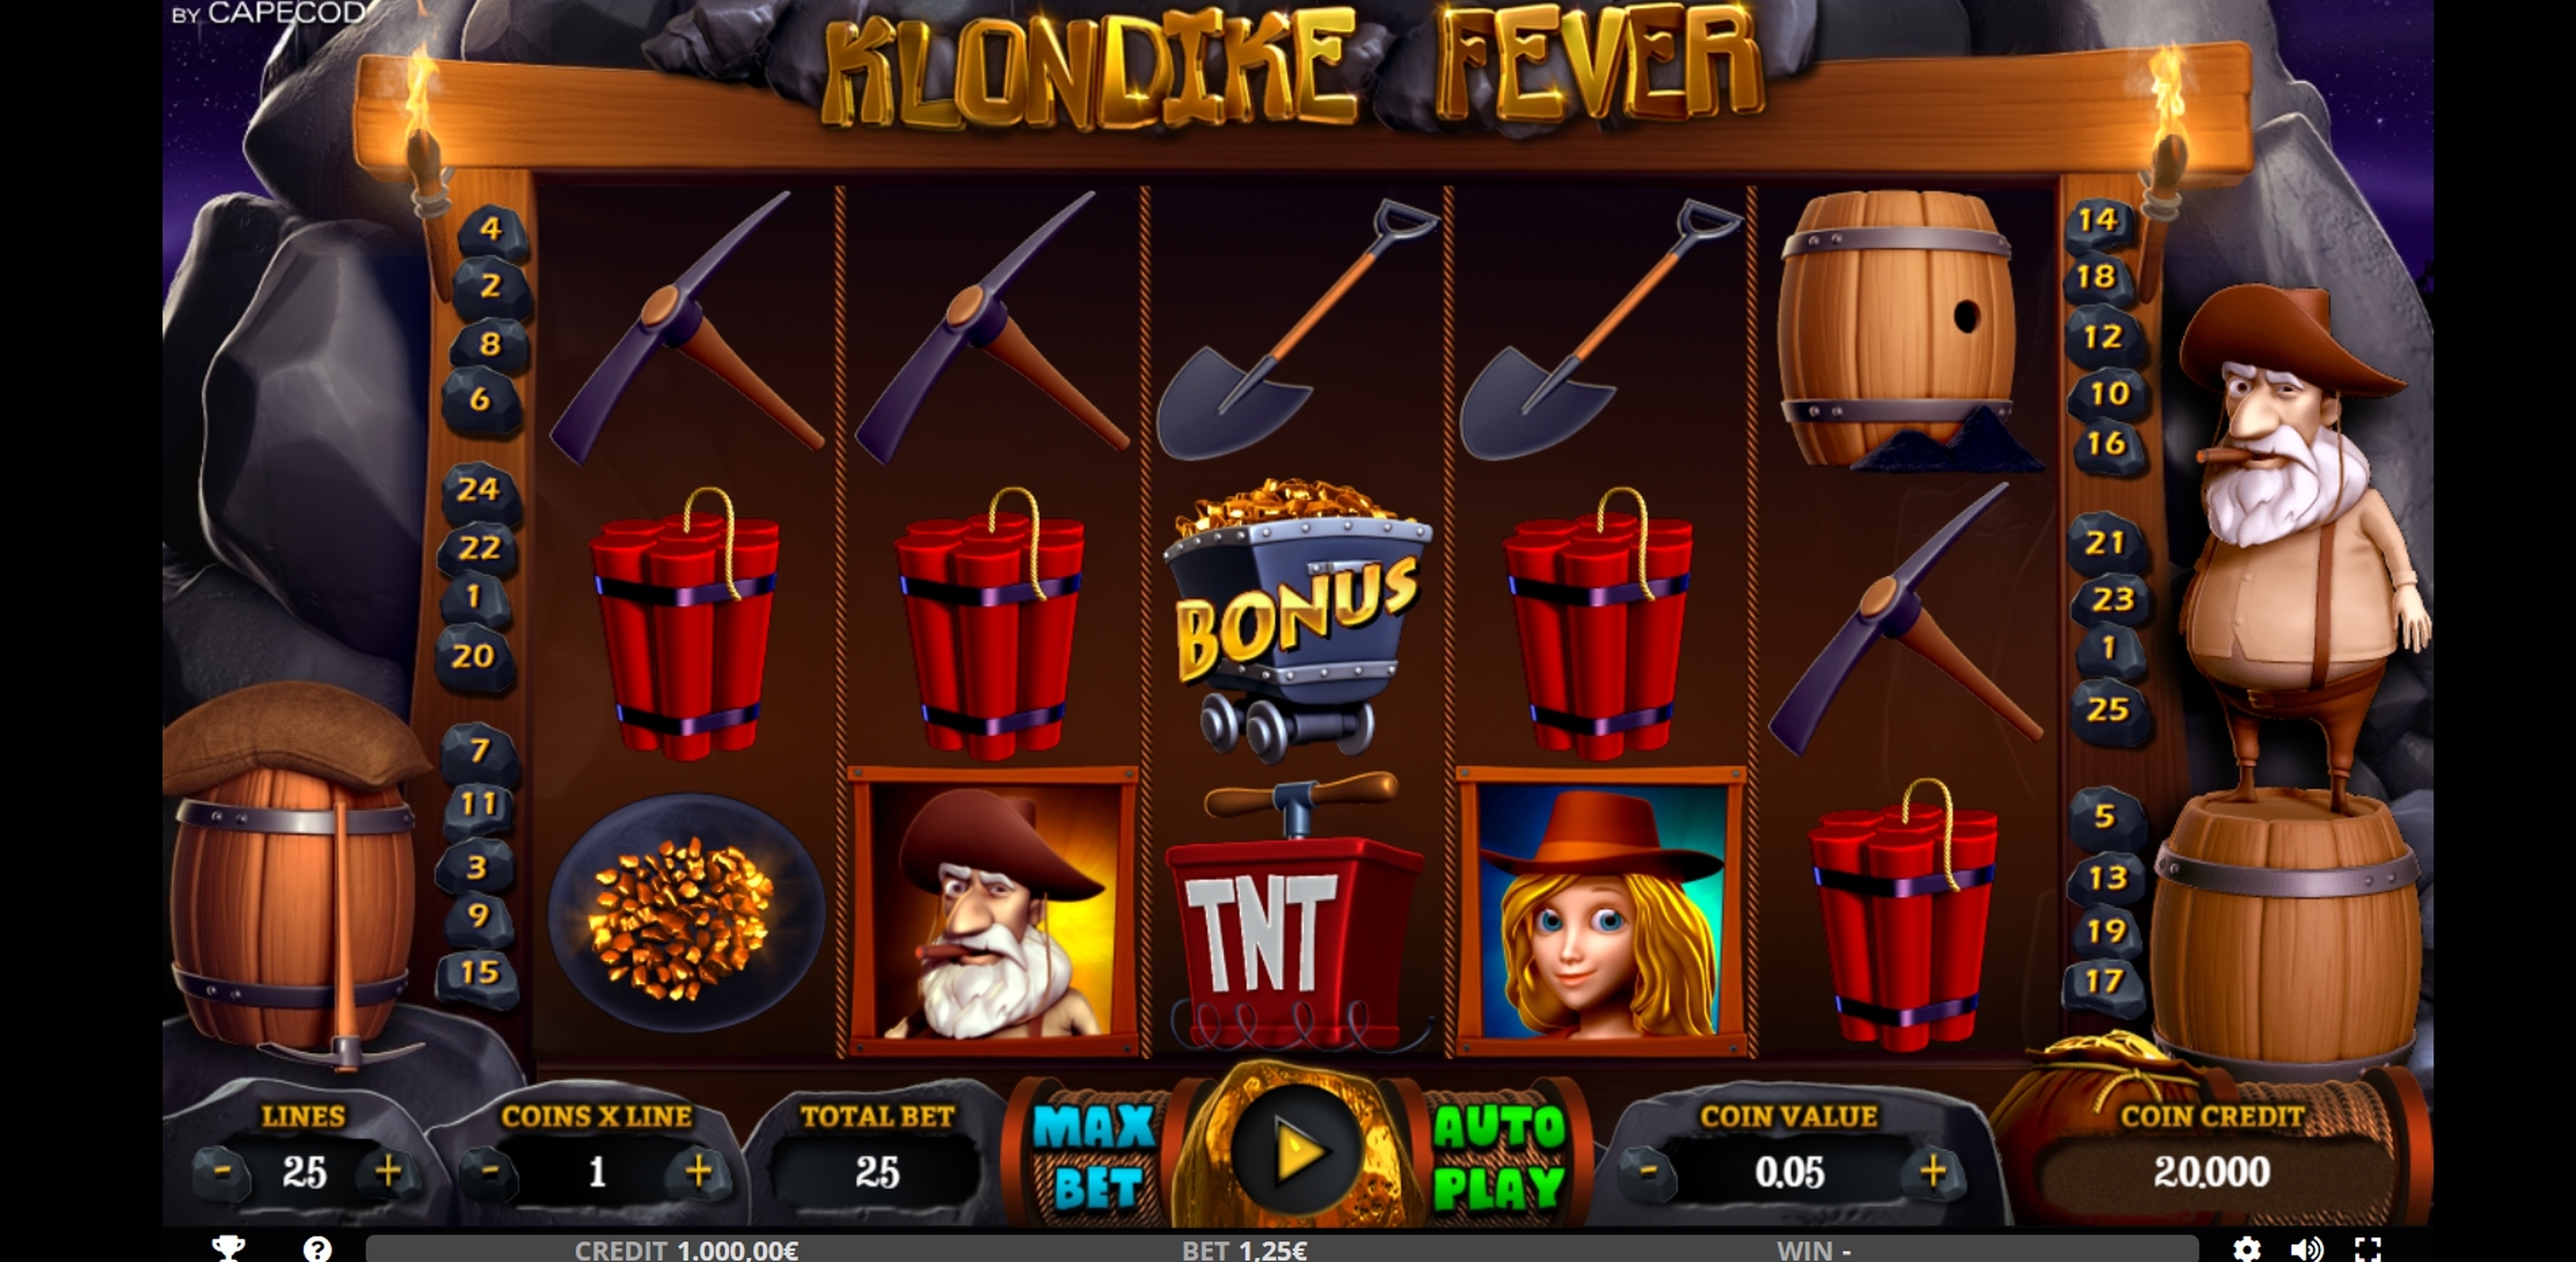 Reels in Klondike Fever Slot Game by Capecod Gaming